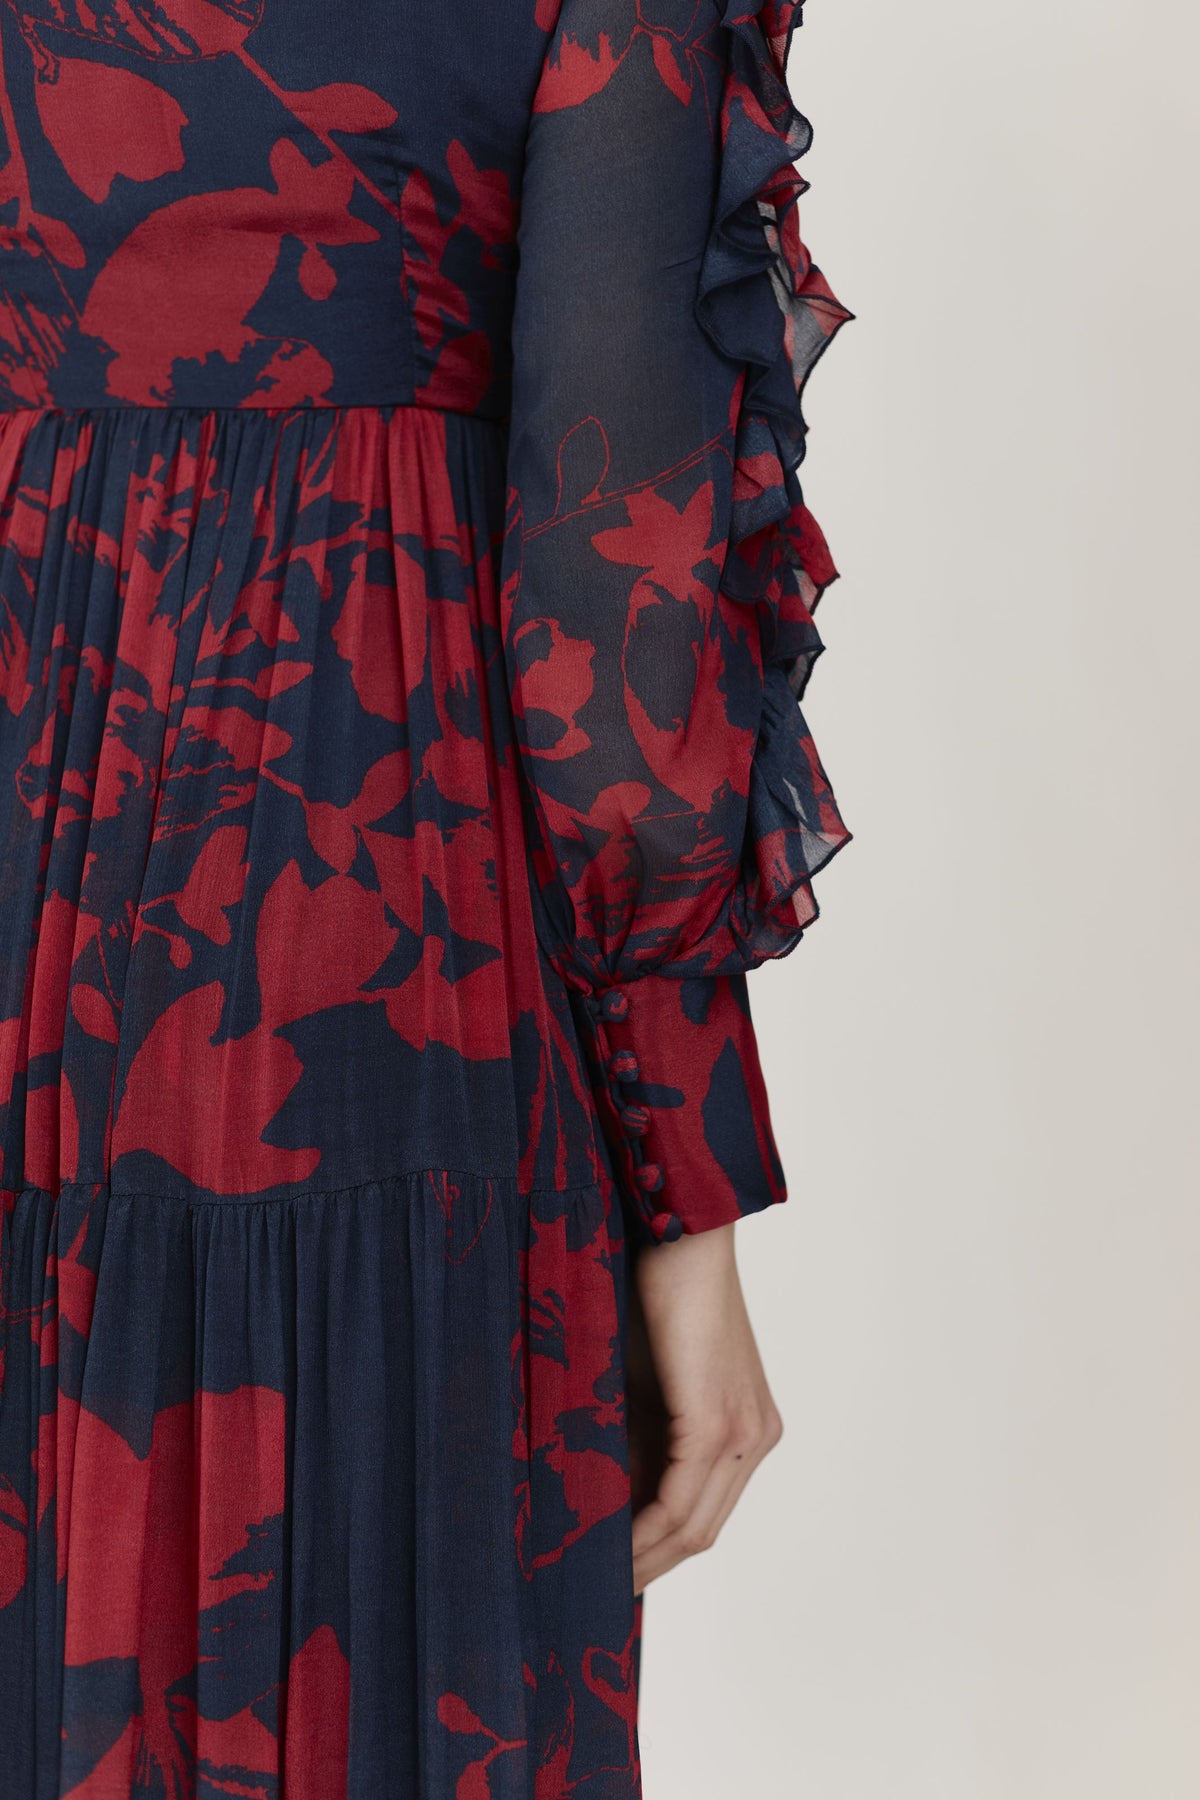 BLUE AND RED FLORAL LONG DRESS